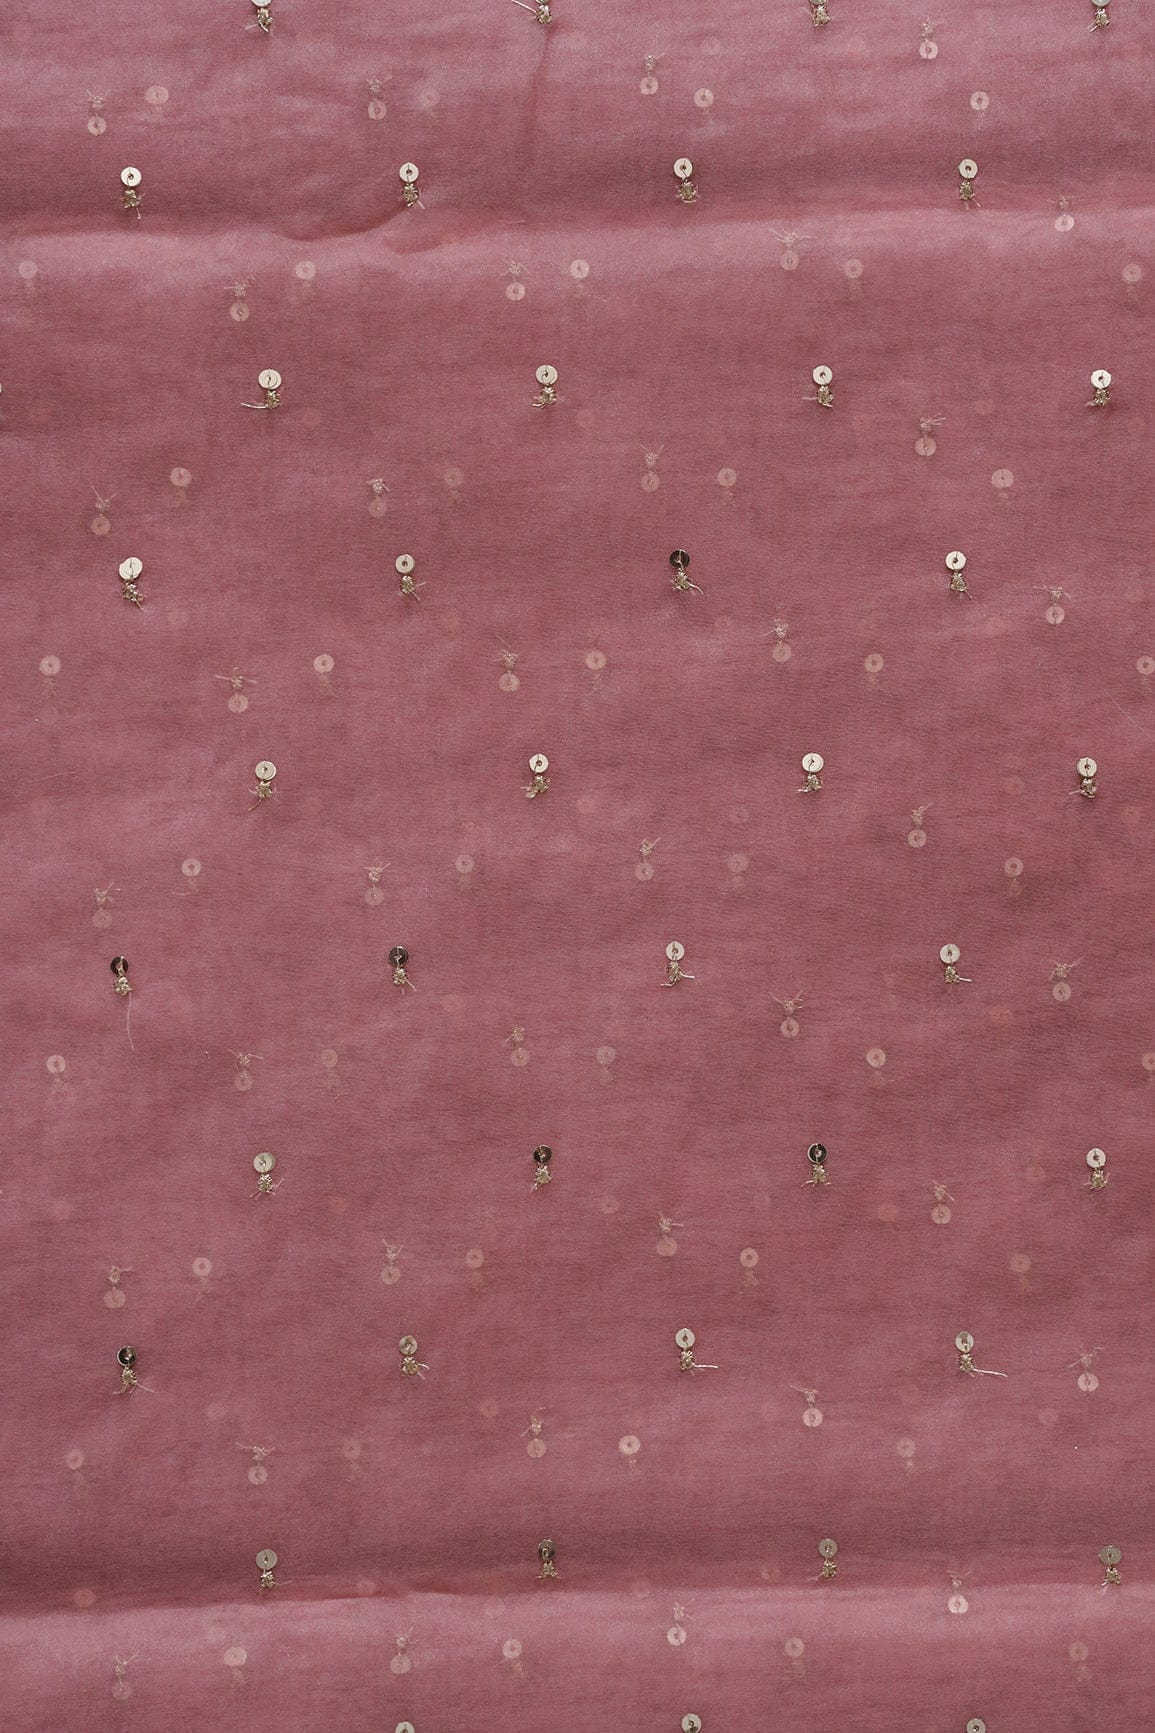 doeraa Embroidery Fabrics Gold Sequins Small Motif Embroidery Work On Pink Organza Fabric